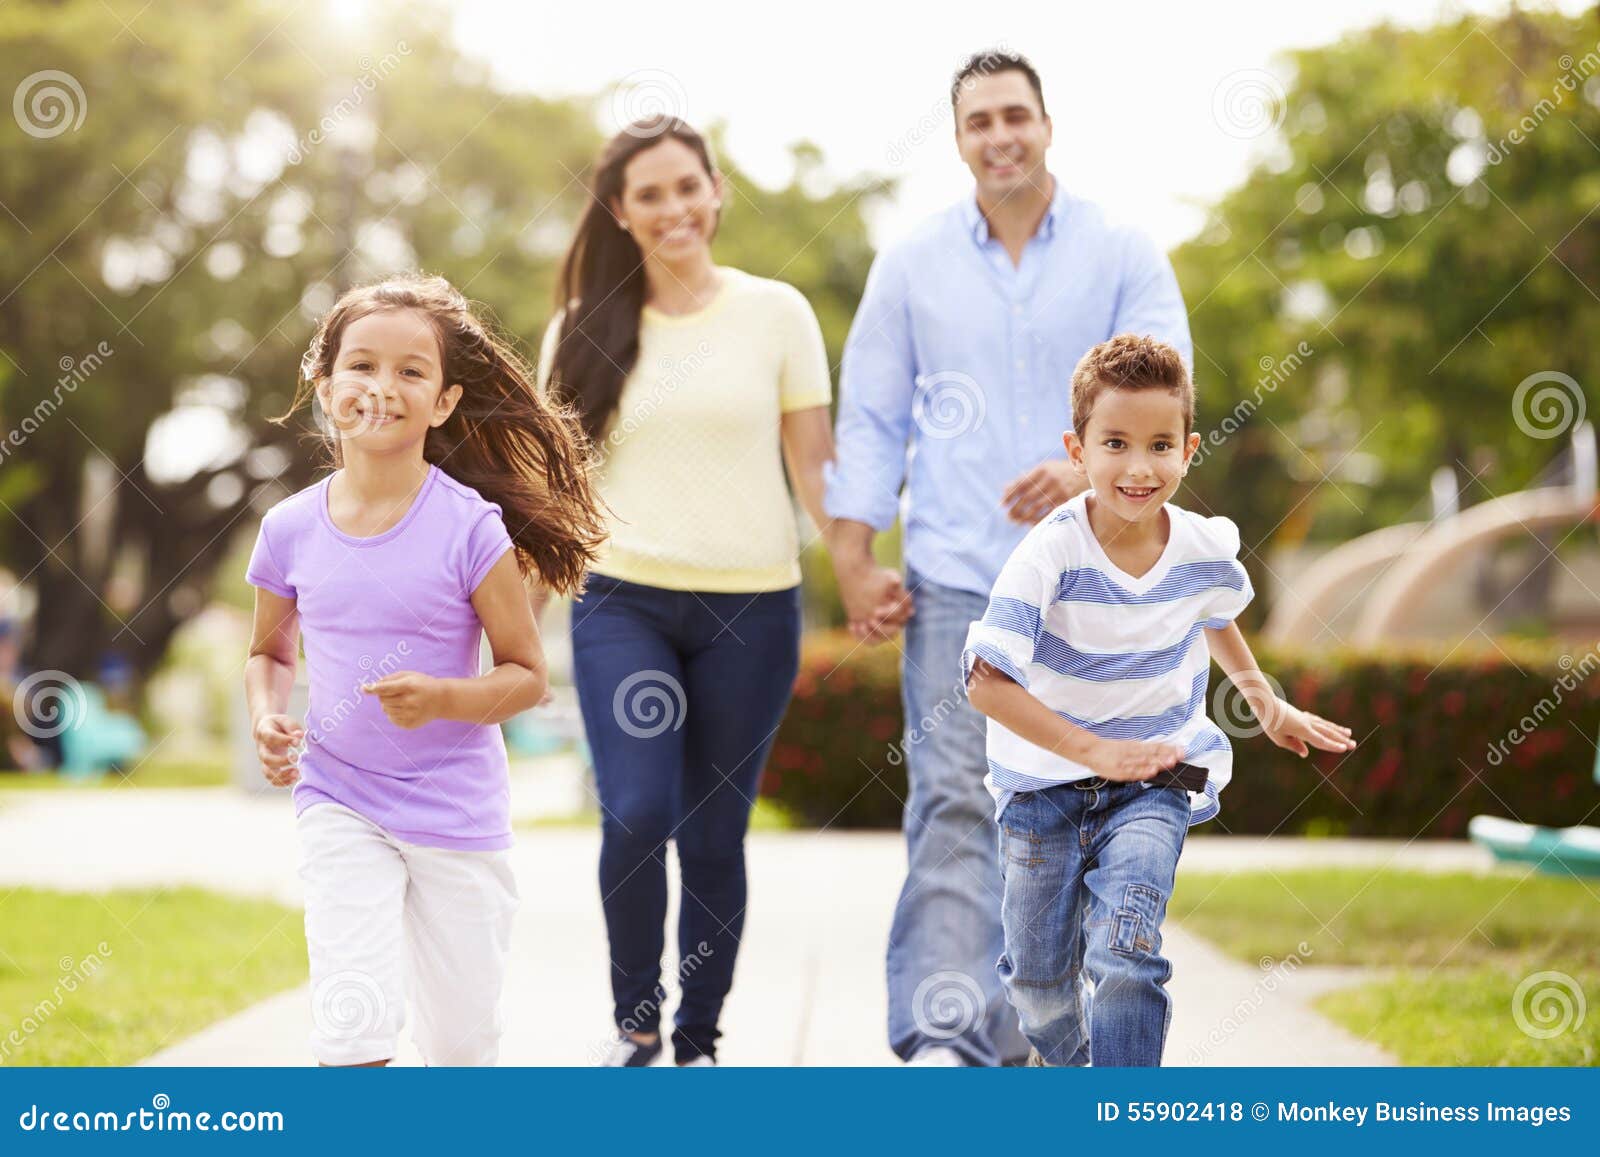 hispanic family walking in park together